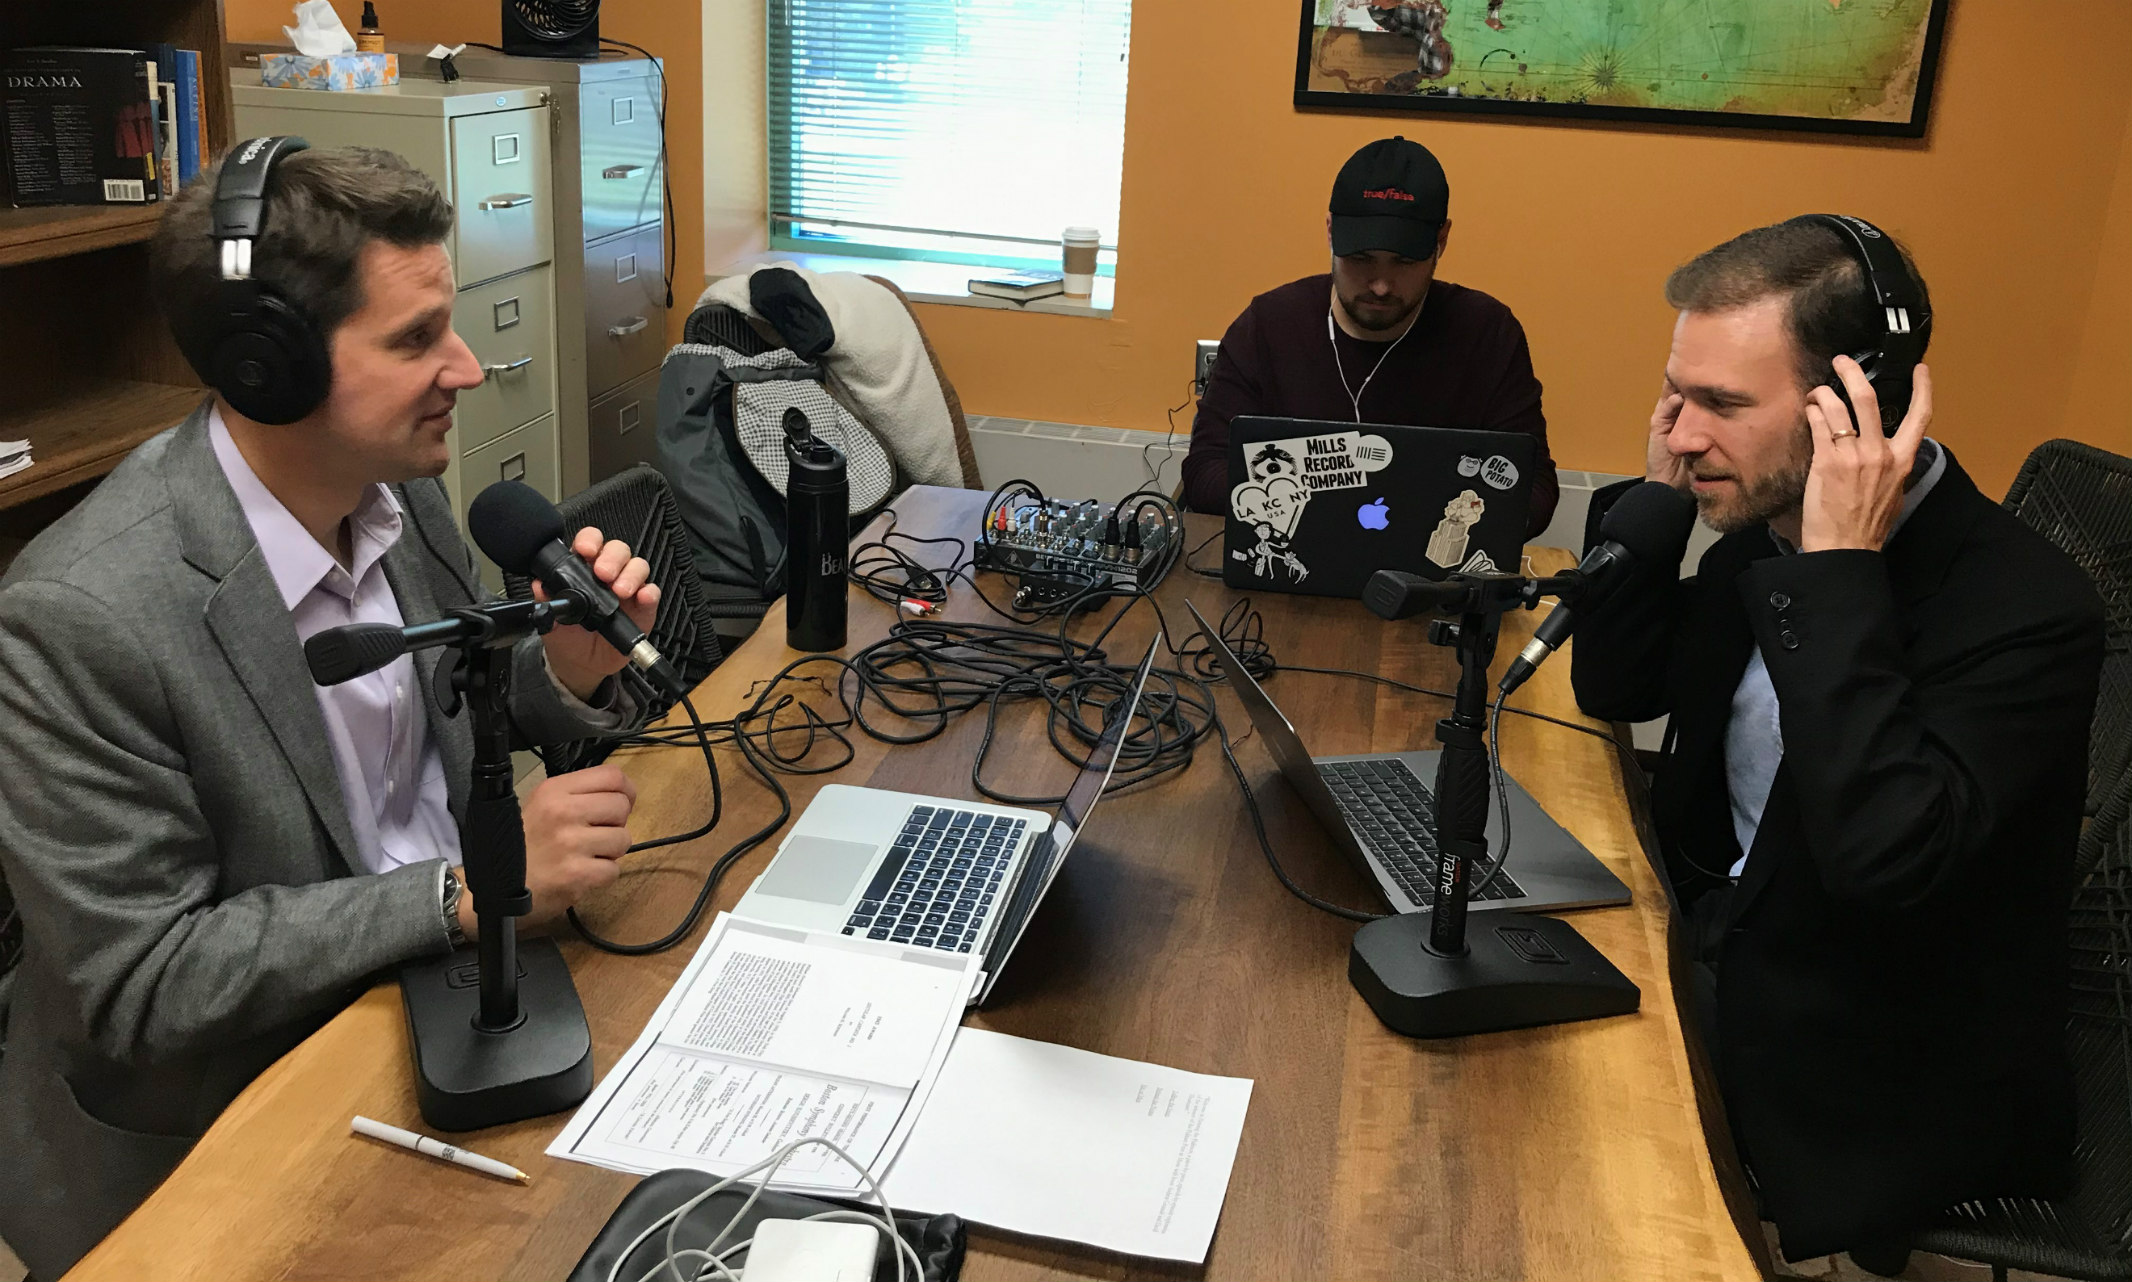 David Thurmaier, Andrew Granade and Tristan Harris record “Hearing the Pulitzers" podcast.